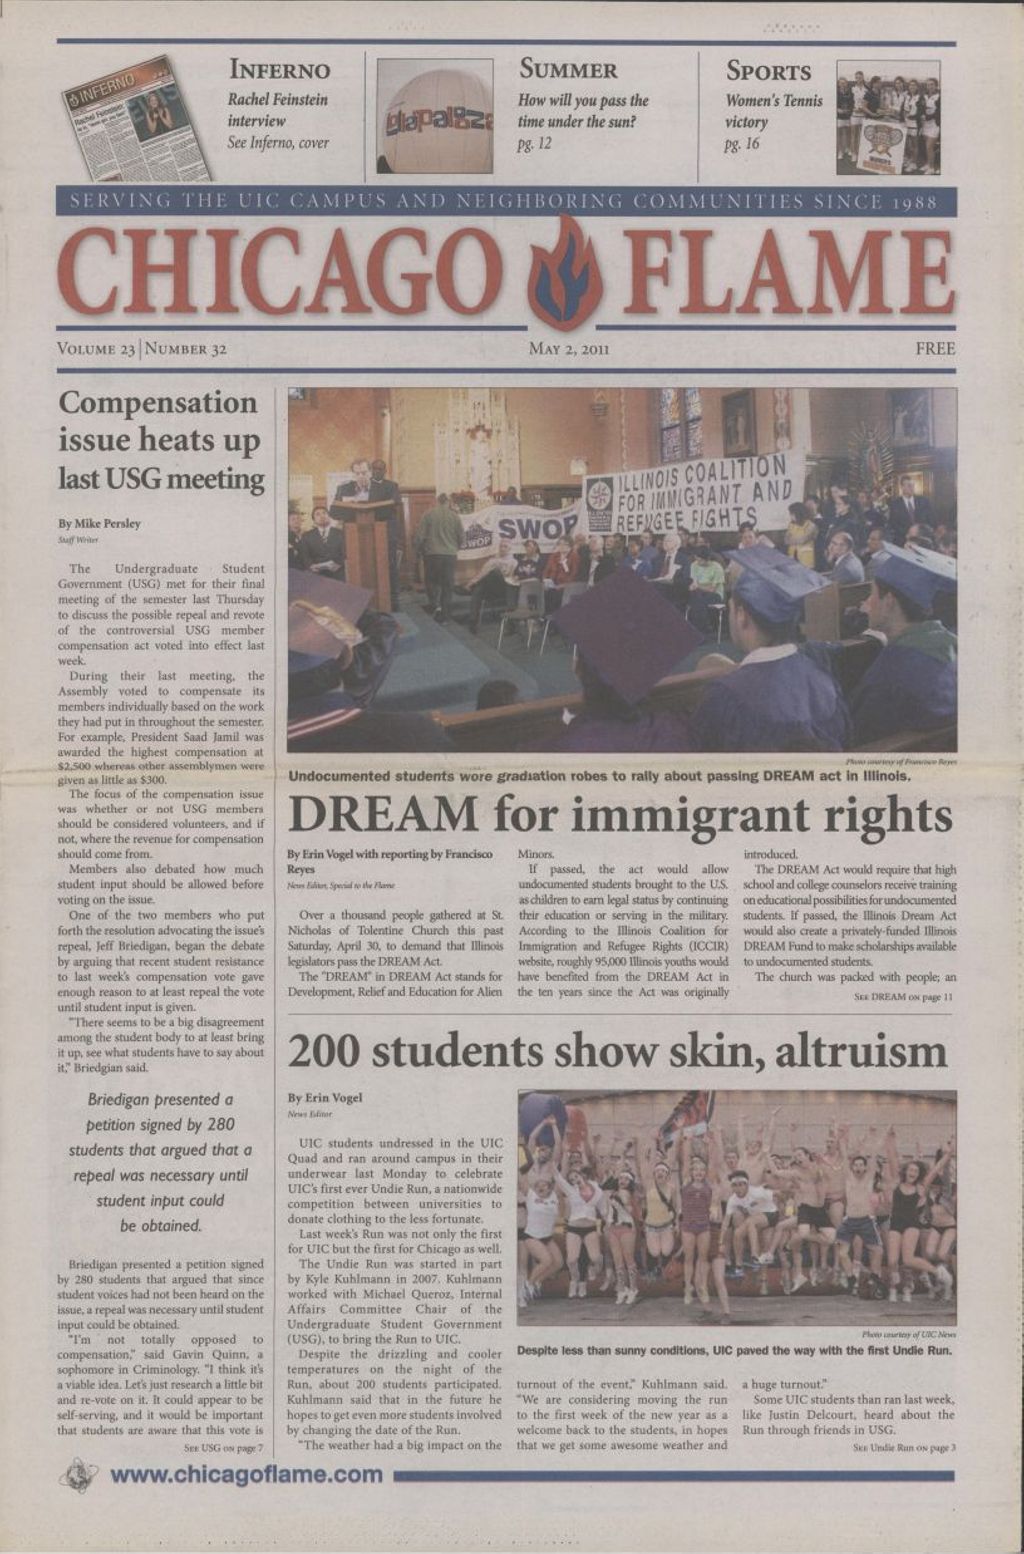 Chicago Flame (May 2, 2011)